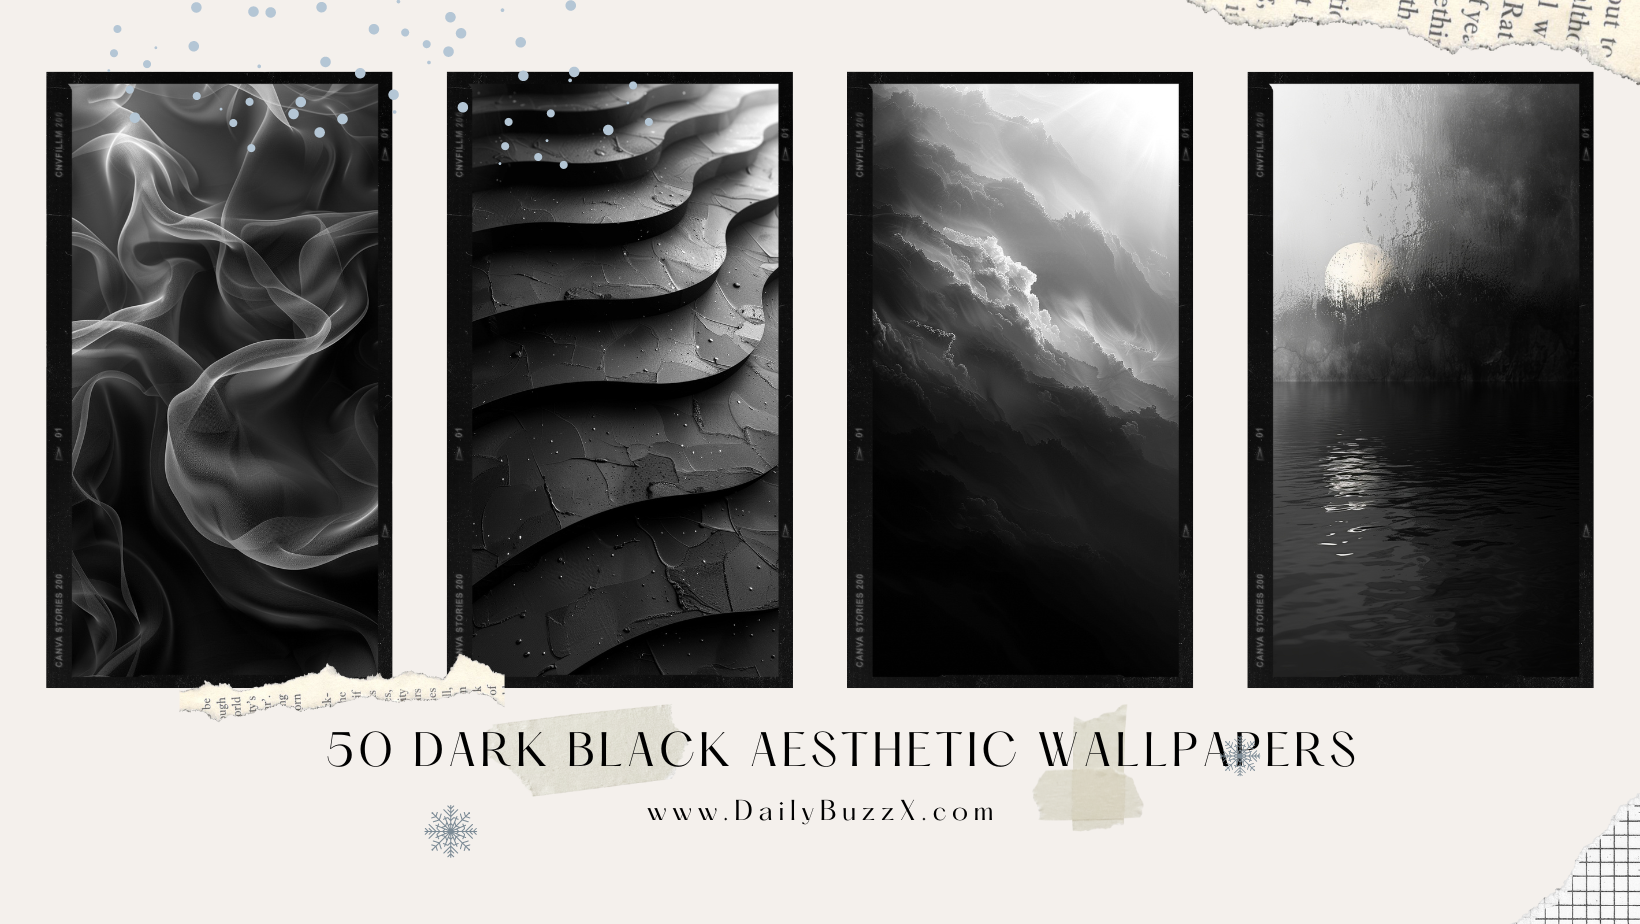 A Collection of 50 Unique Dark Black Aesthetic Wallpapers